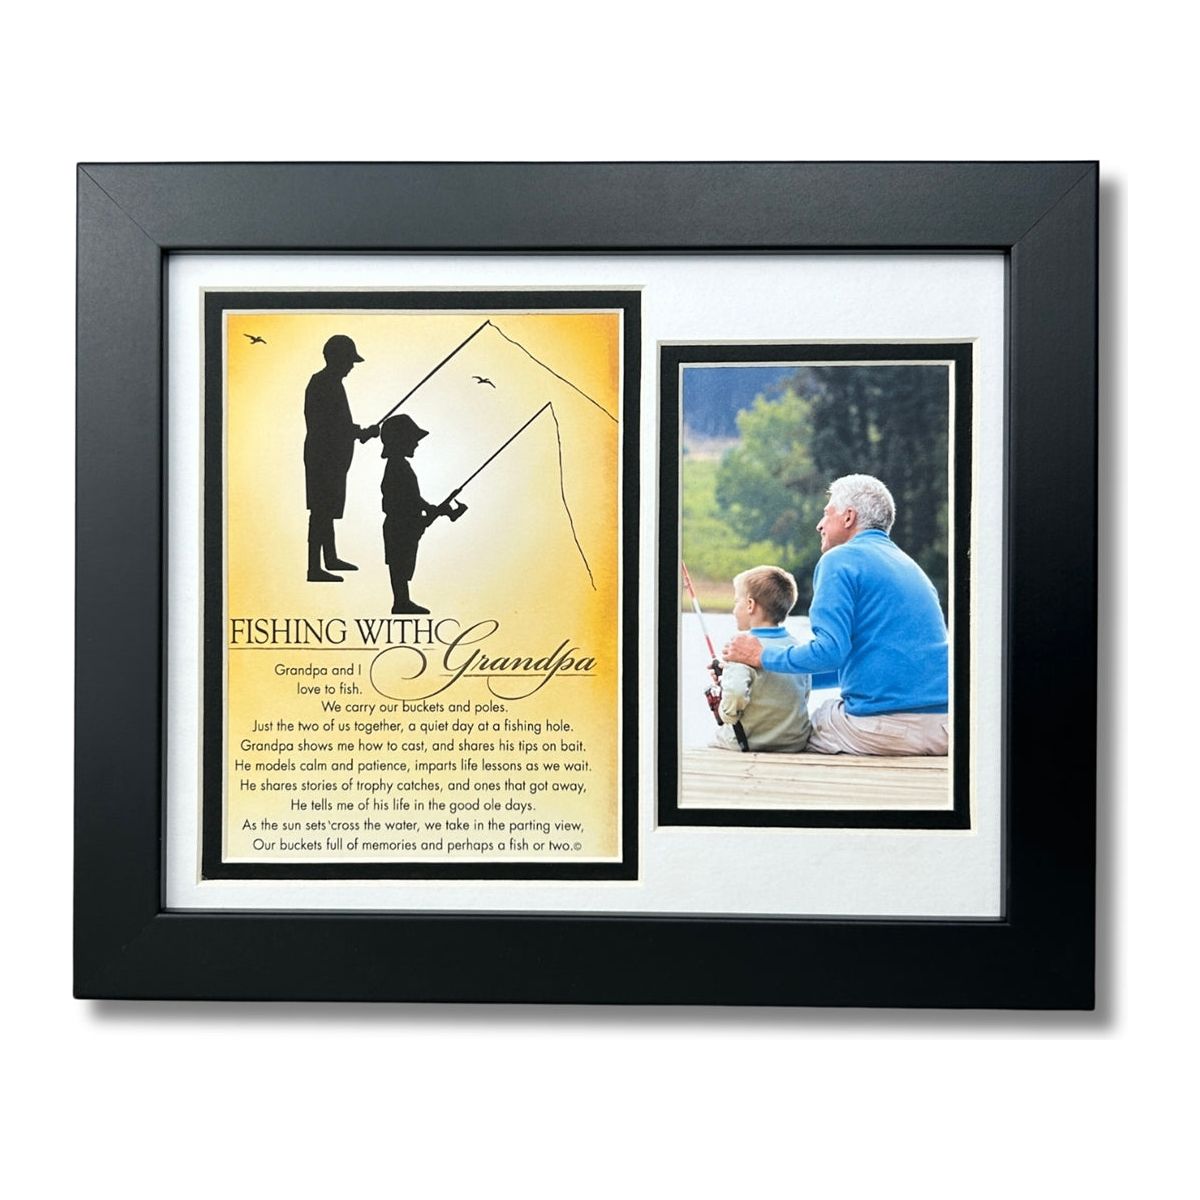 8x10 black frame with white and black double mat, includes "Fishing with Grandpa" artwork with poem and silhoutte of Grandpa and Grandson and space for photo.